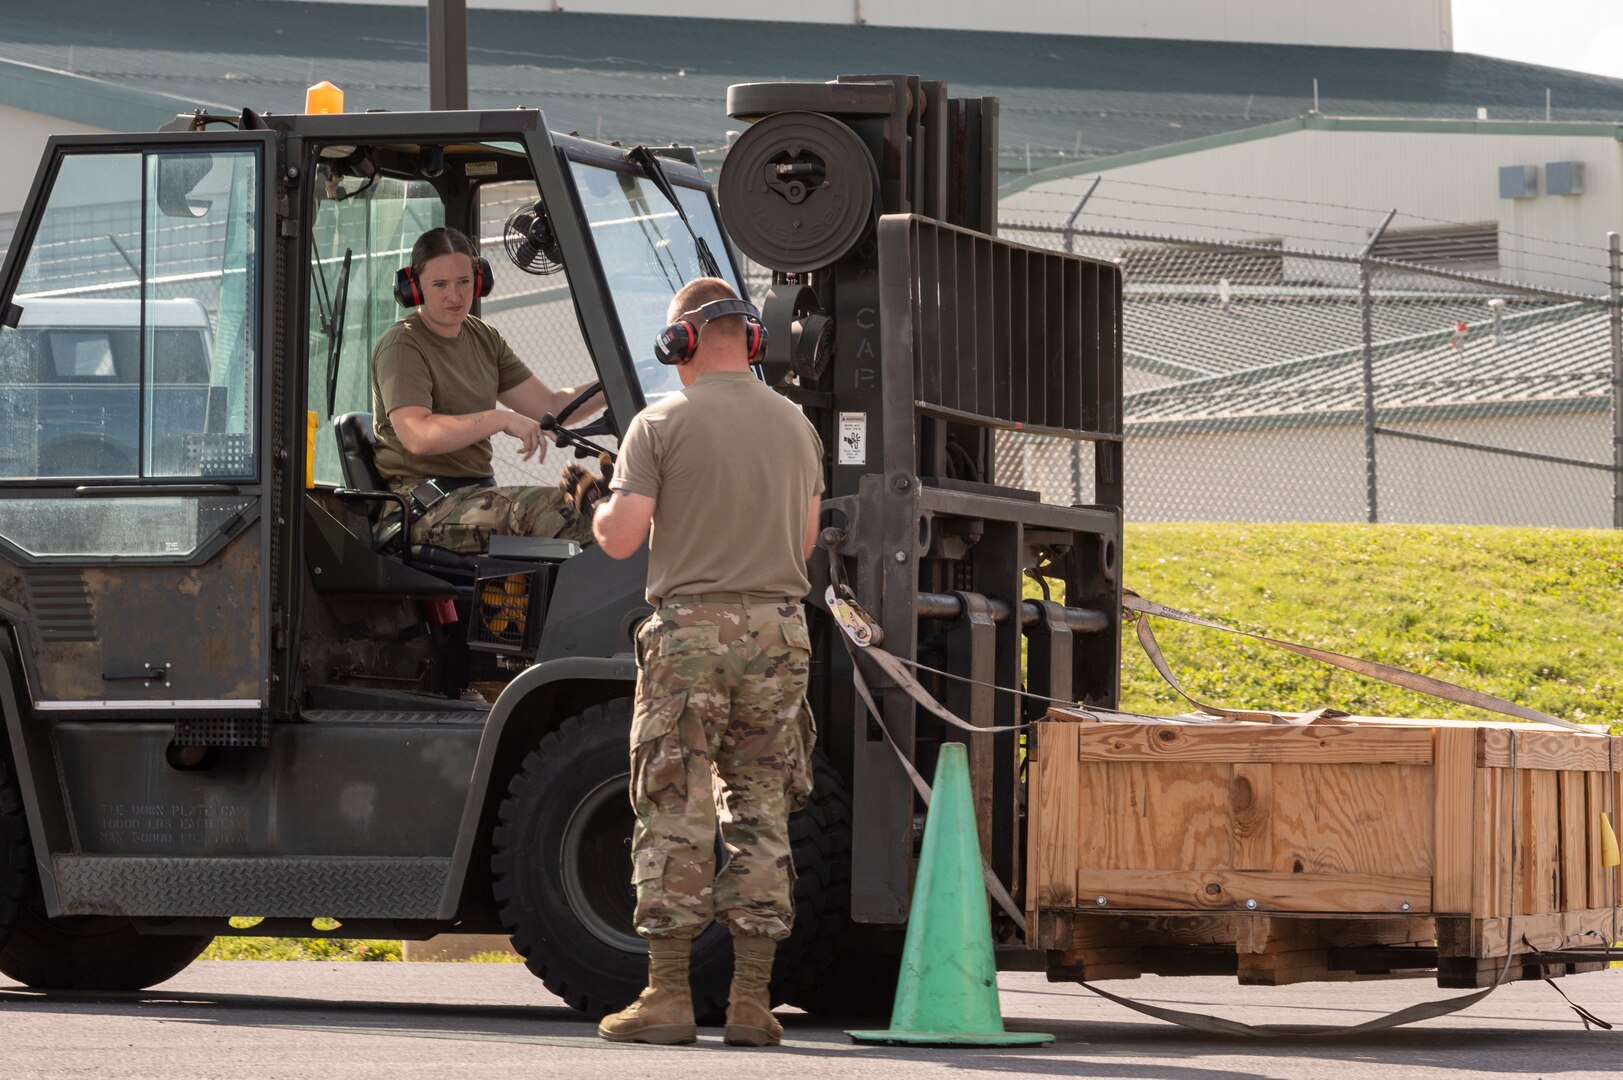 U.S. Air Force Master Sgt. Shad Jenkins, a ground transportation specialist with the 167th Logistics Readiness Squadron, instructs Senior Airman Haley Curry, traffic management specialist, as she drives a 10,000 pound forklift during a forklift certification event at the 167th Airlift Wing, Martinsburg, West Virginia, June 9, 2022. Airmen with the 167th LRS conduct forklift training such as this annually to ensure all their guardsmen are able to perform common heavy lifting tasks essential to the mission.